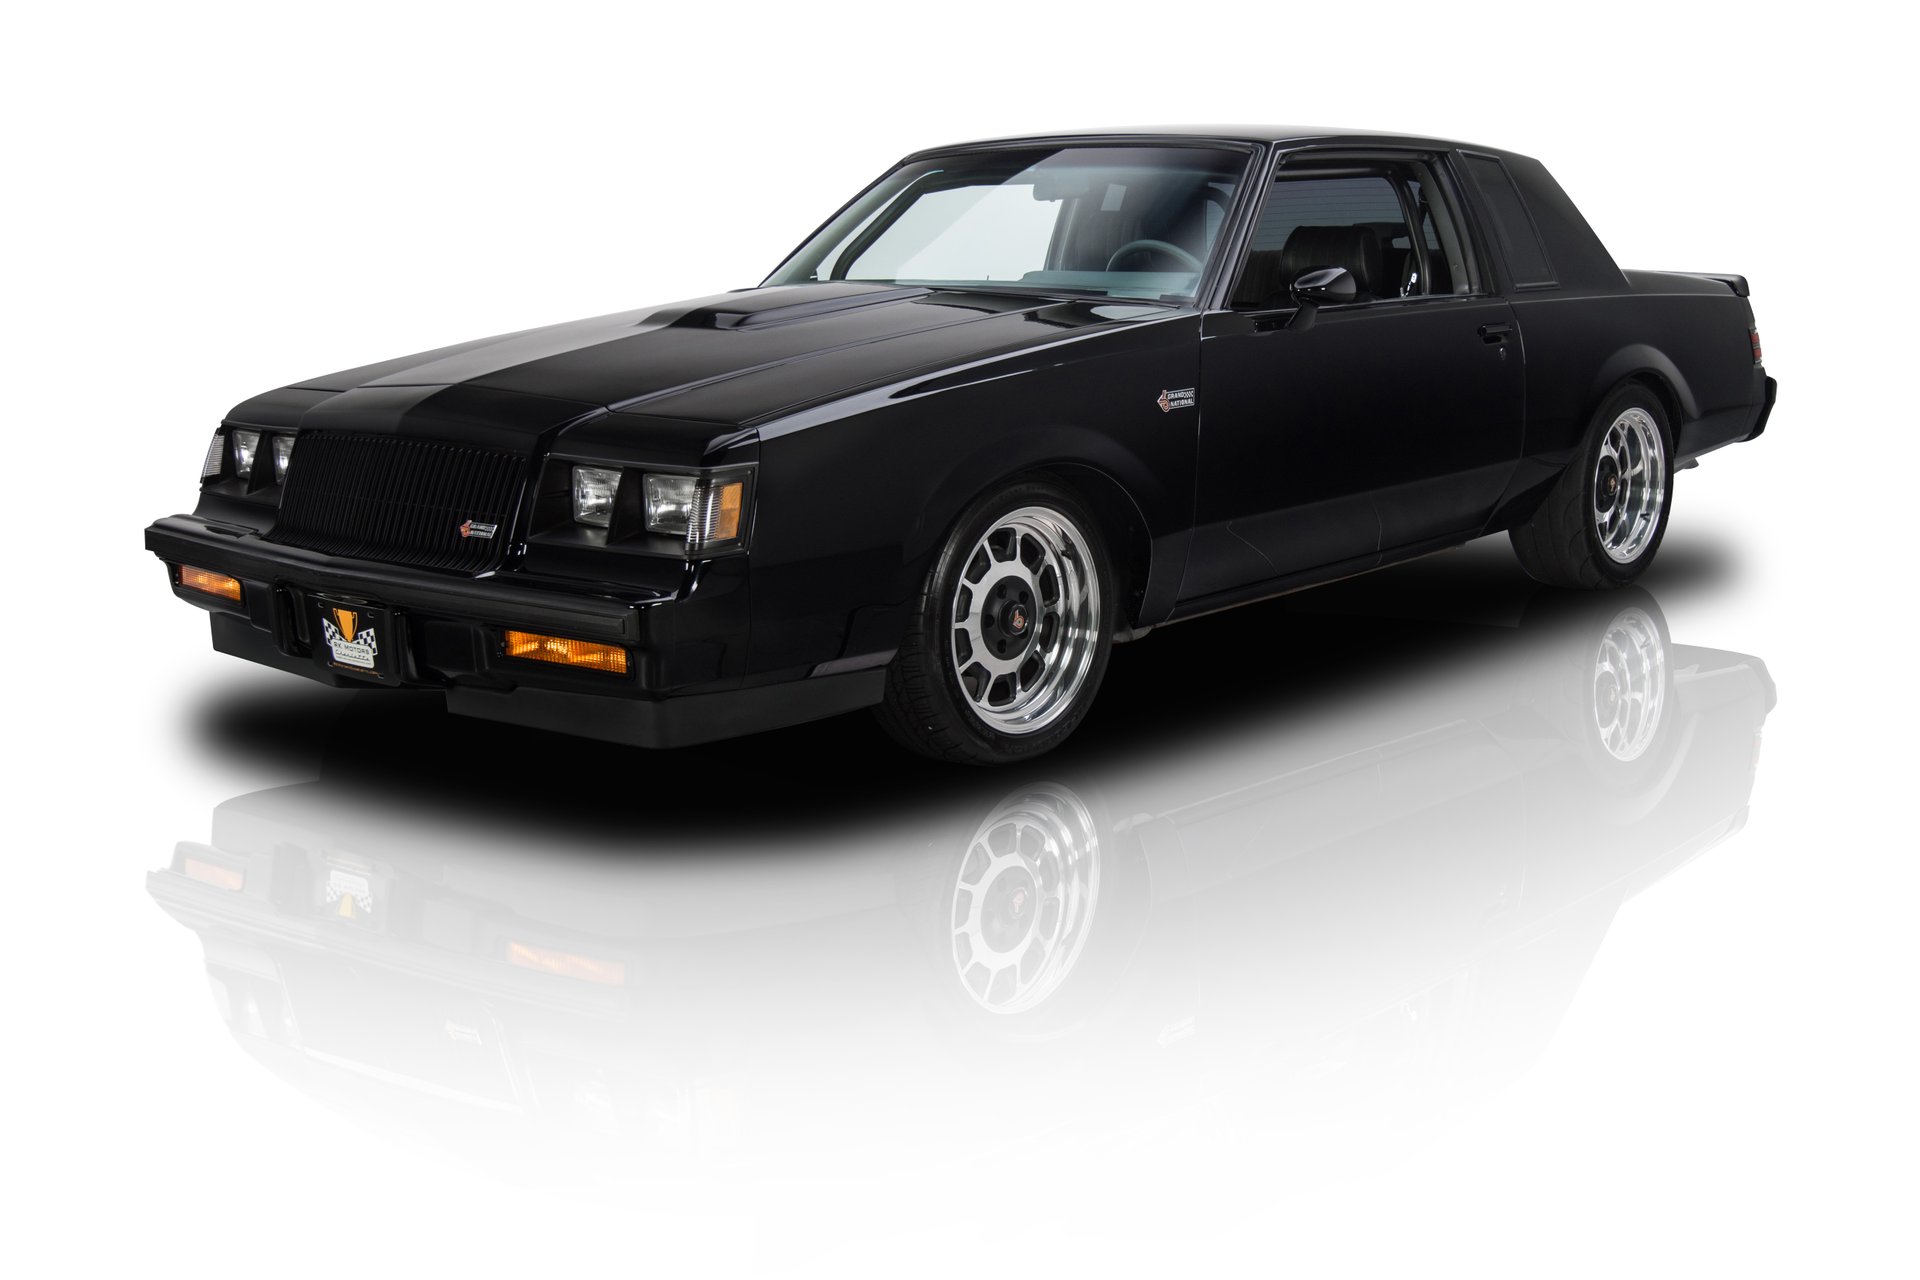 1987 Buick Grand National | RK Motors Classic Cars and Muscle Cars for Sale